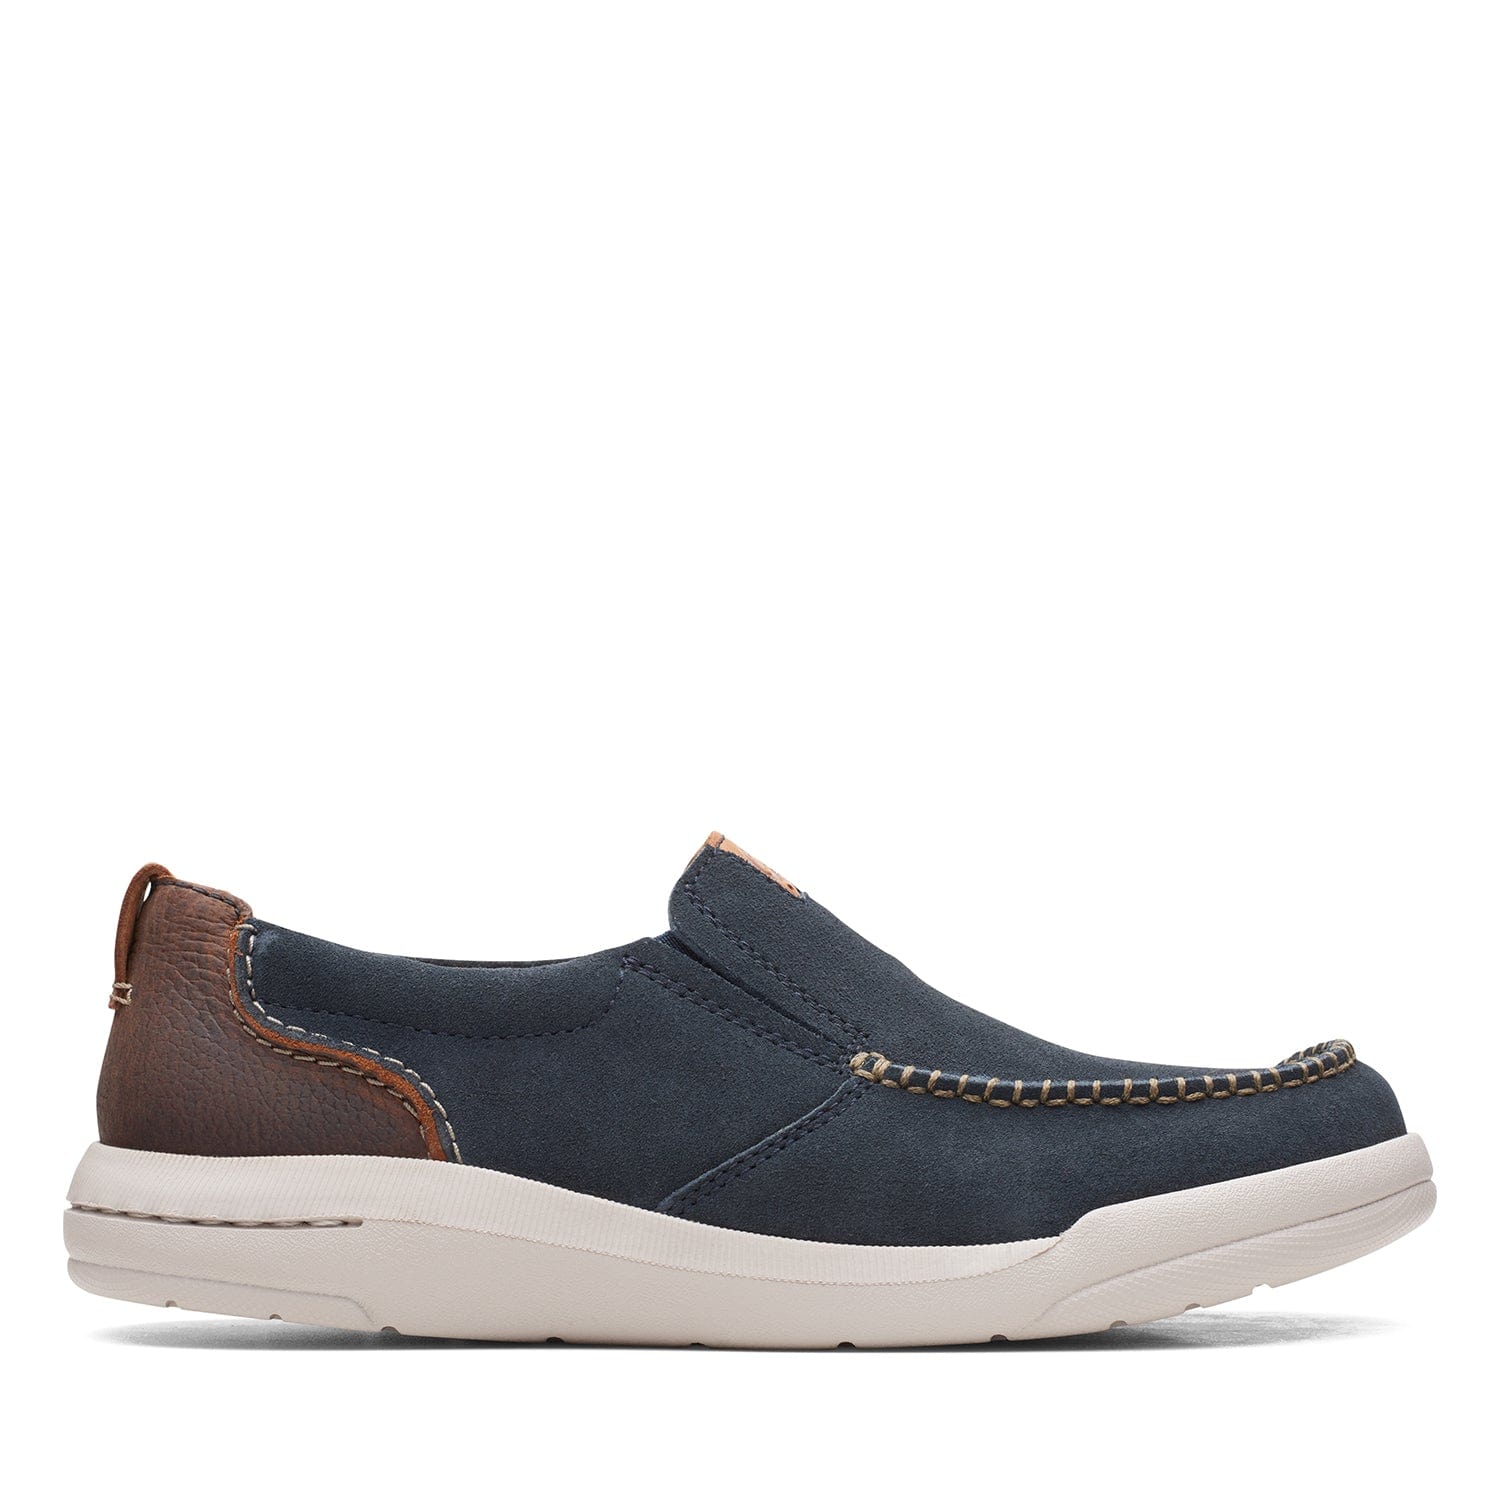 Clarks Driftway Step Shoes - Navy Suede - 261638577 - G Width (Standard Fit)